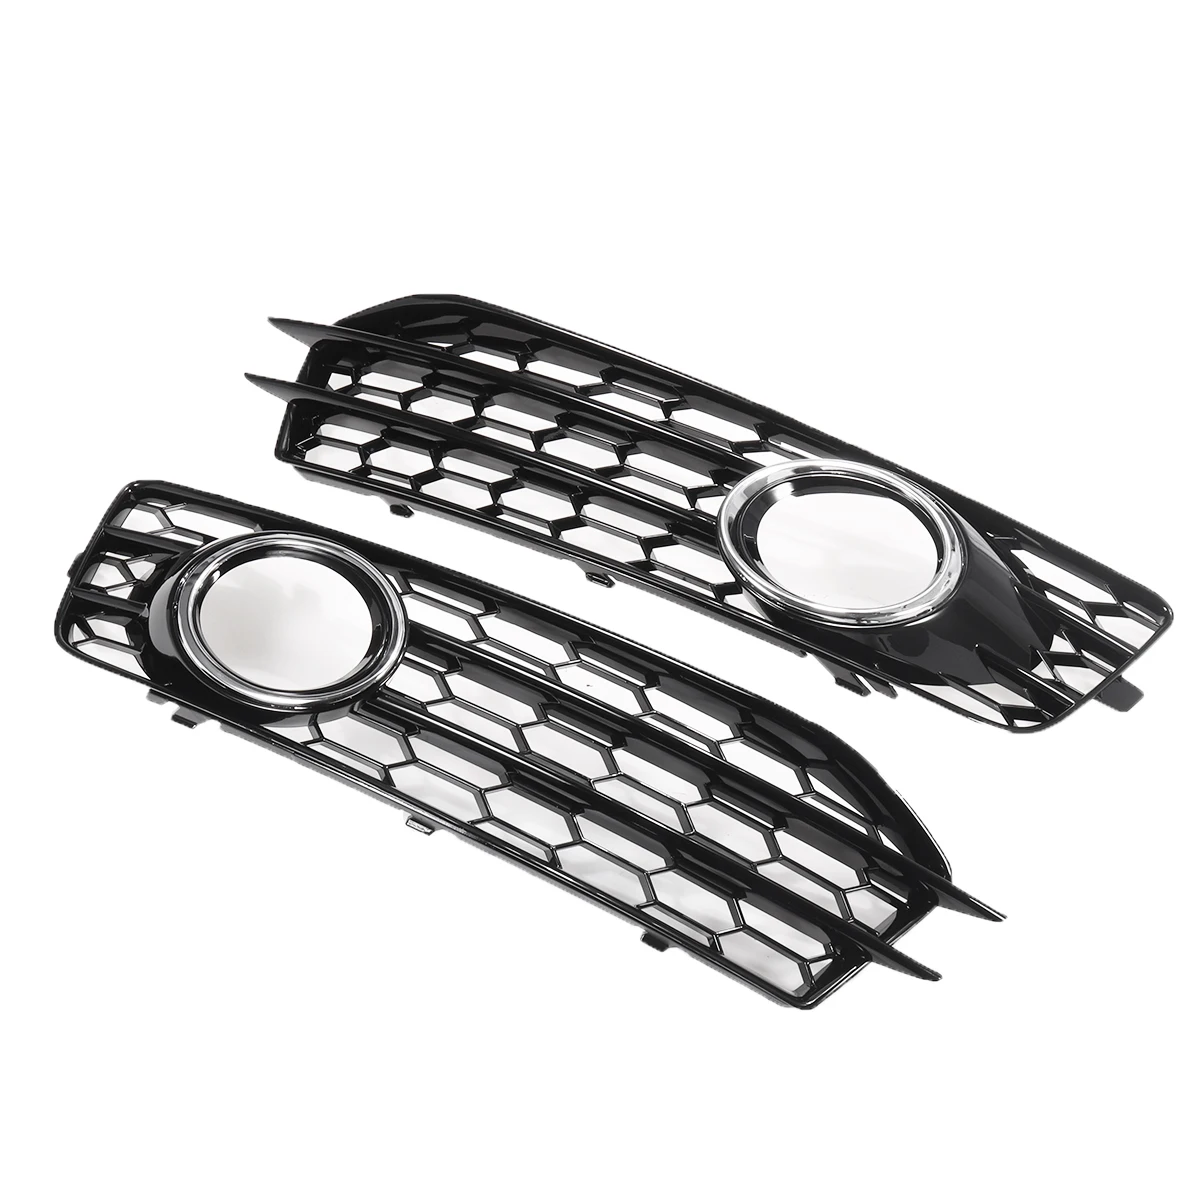 Pair HONEYCOMB Car Front Bumper Fog Light Lamp Grille Grill Cover Mesh for Audi A3 8P S-Line 2009-2012 Front Grille 8P0807682